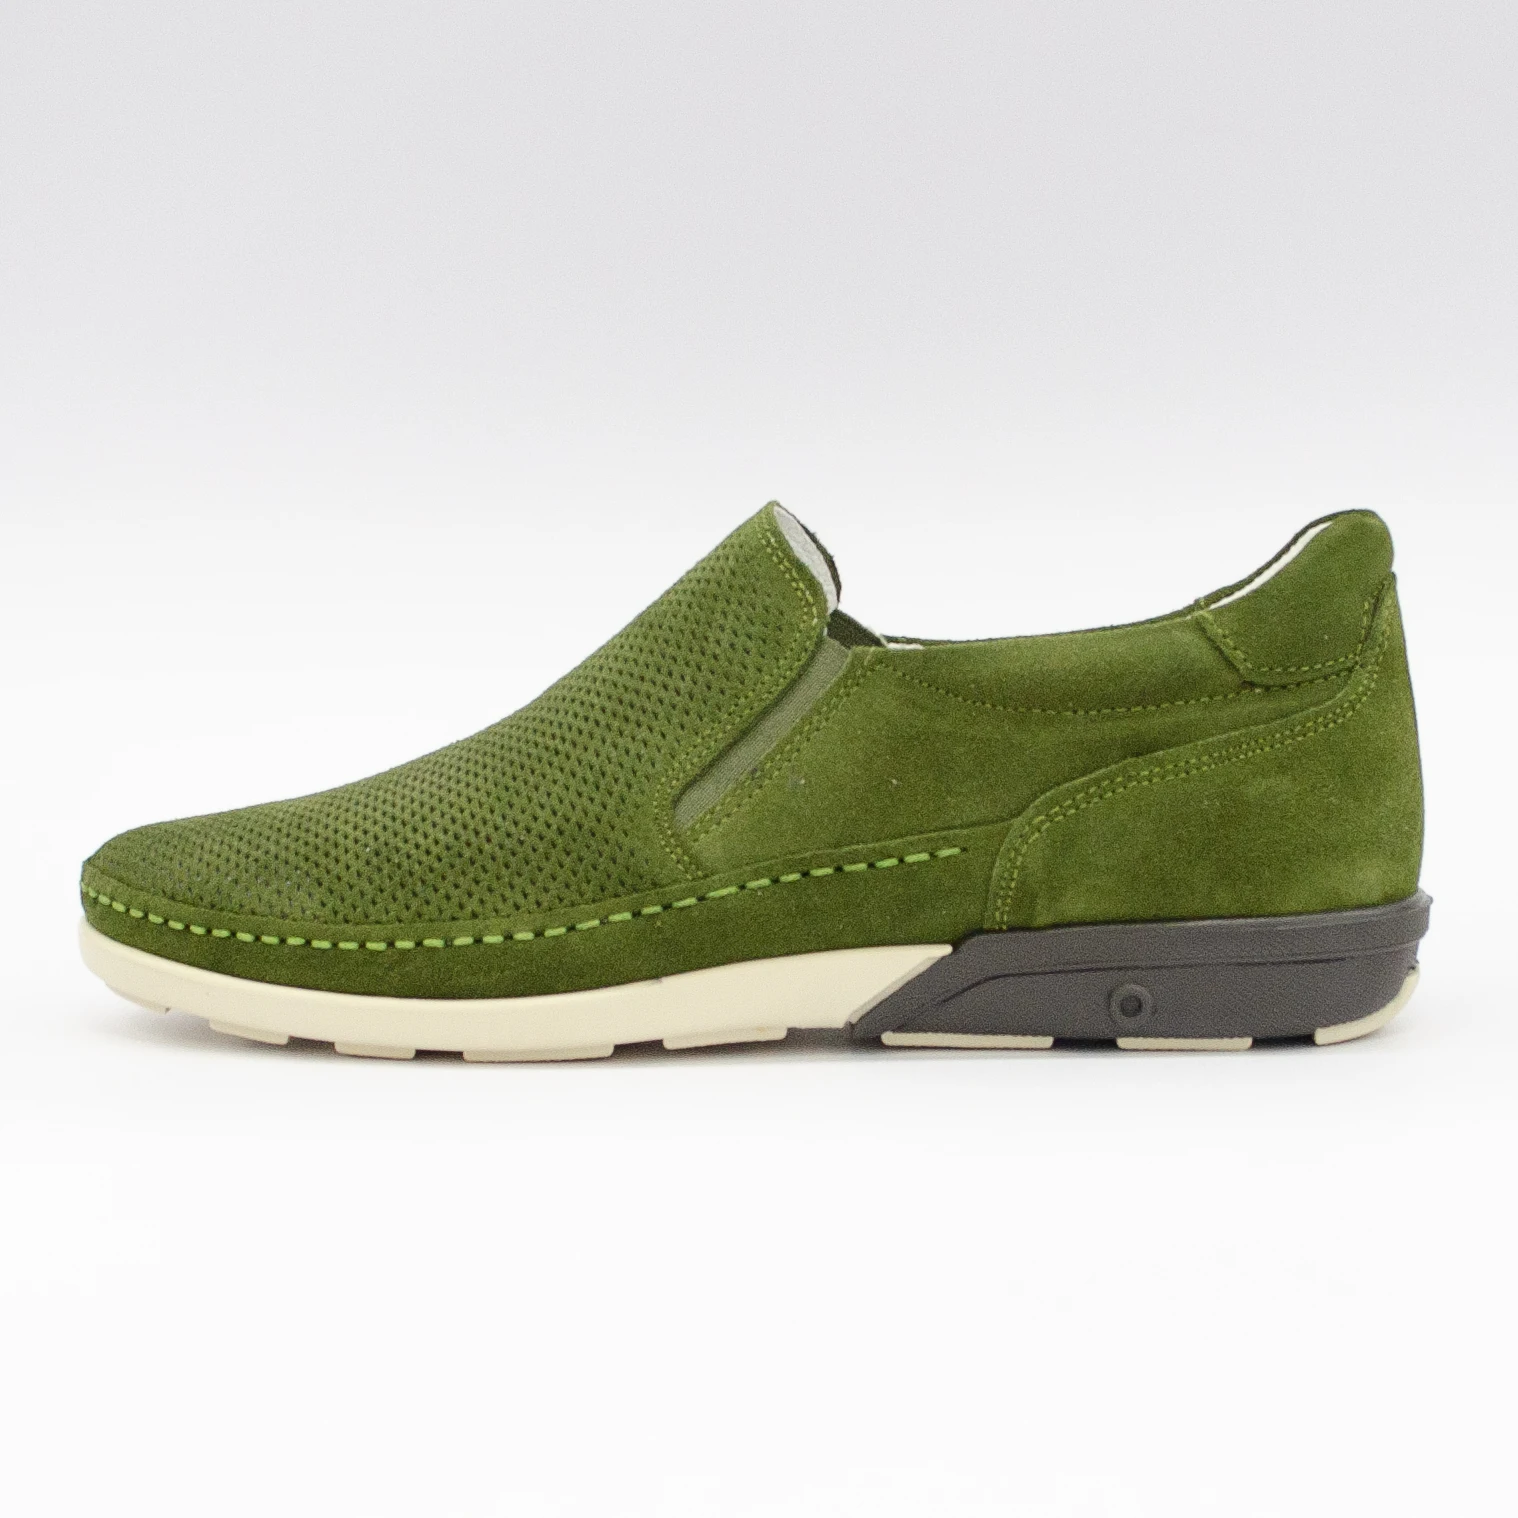 Source COMFY339. SUEDE GREEN. ITALIAN LEATHER SHOES. ARTISANAL MADE IN ITALY SHOES. AVAILABLE IN ALL THE COLORS on m.alibaba.com